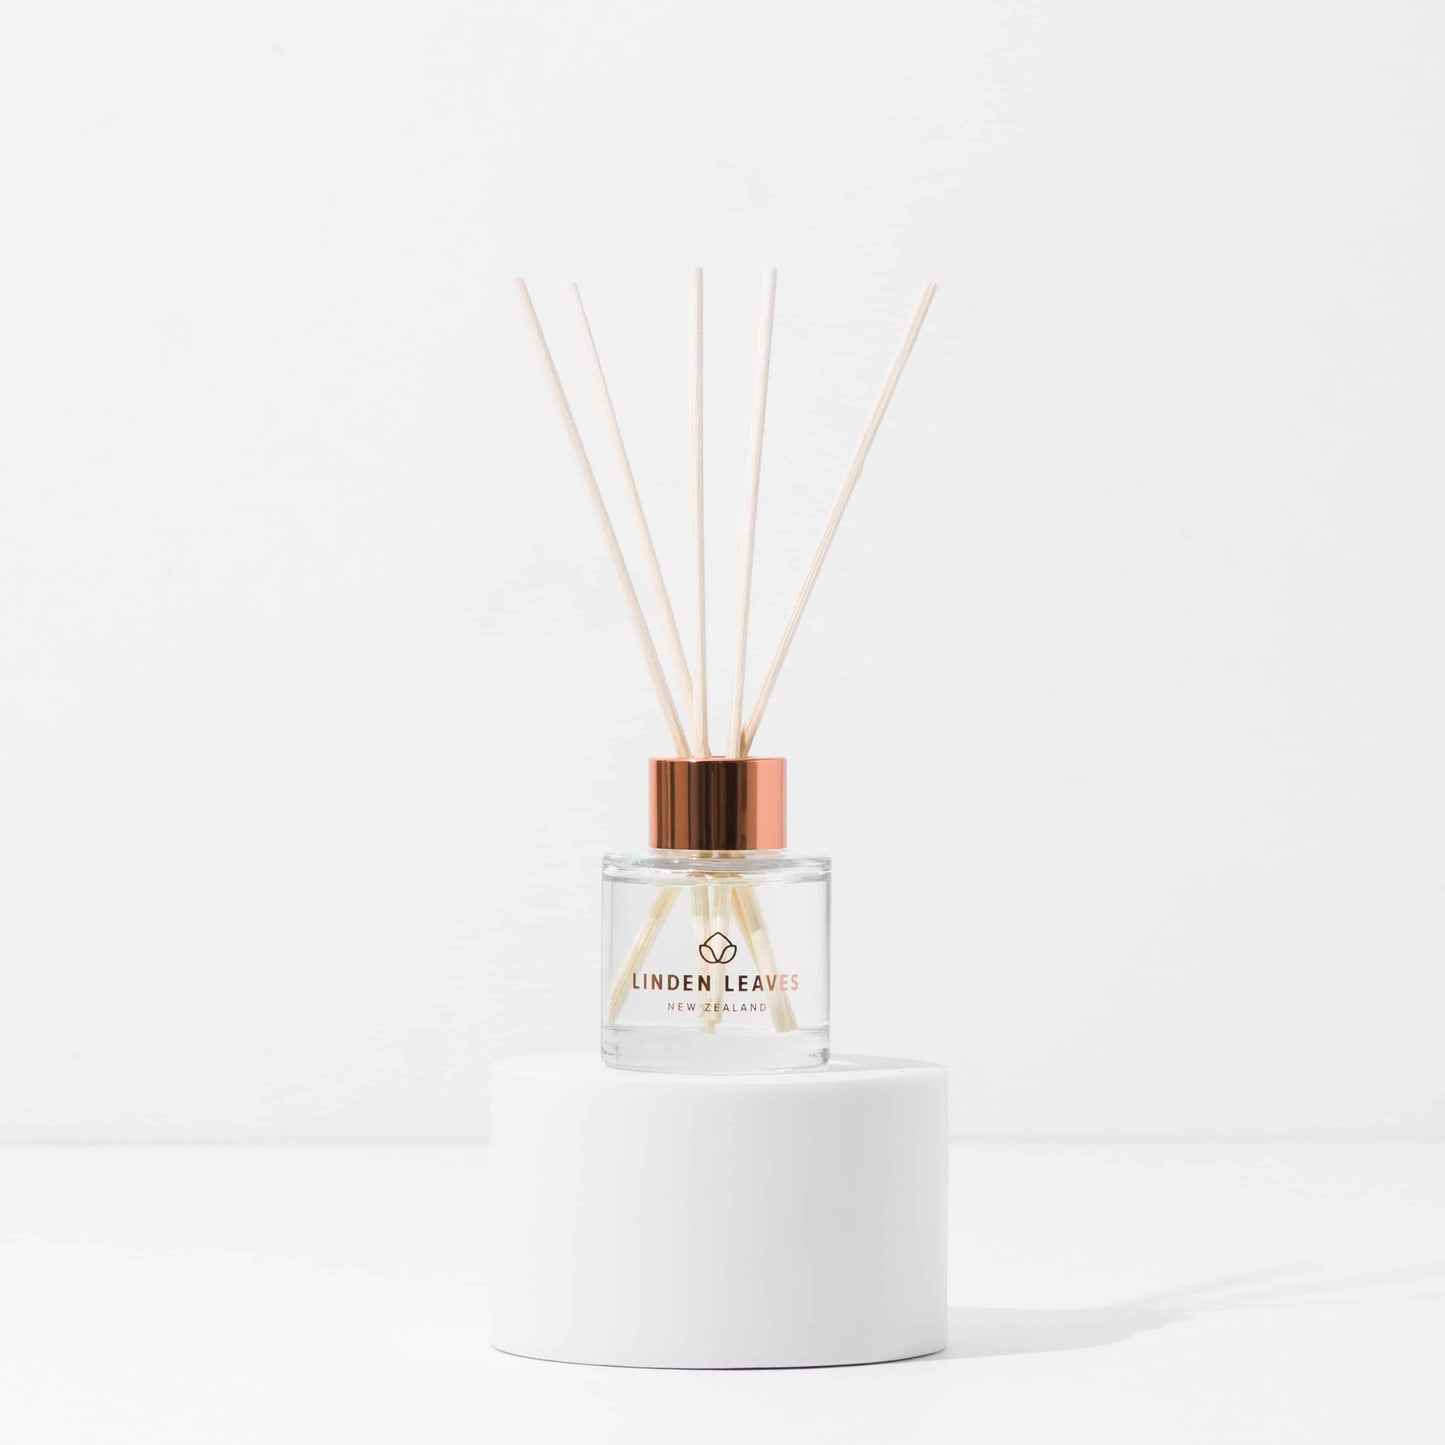 Limited Edition Caramel Spice Midi Diffuser 50ml Linden Leaves Home Fragrances